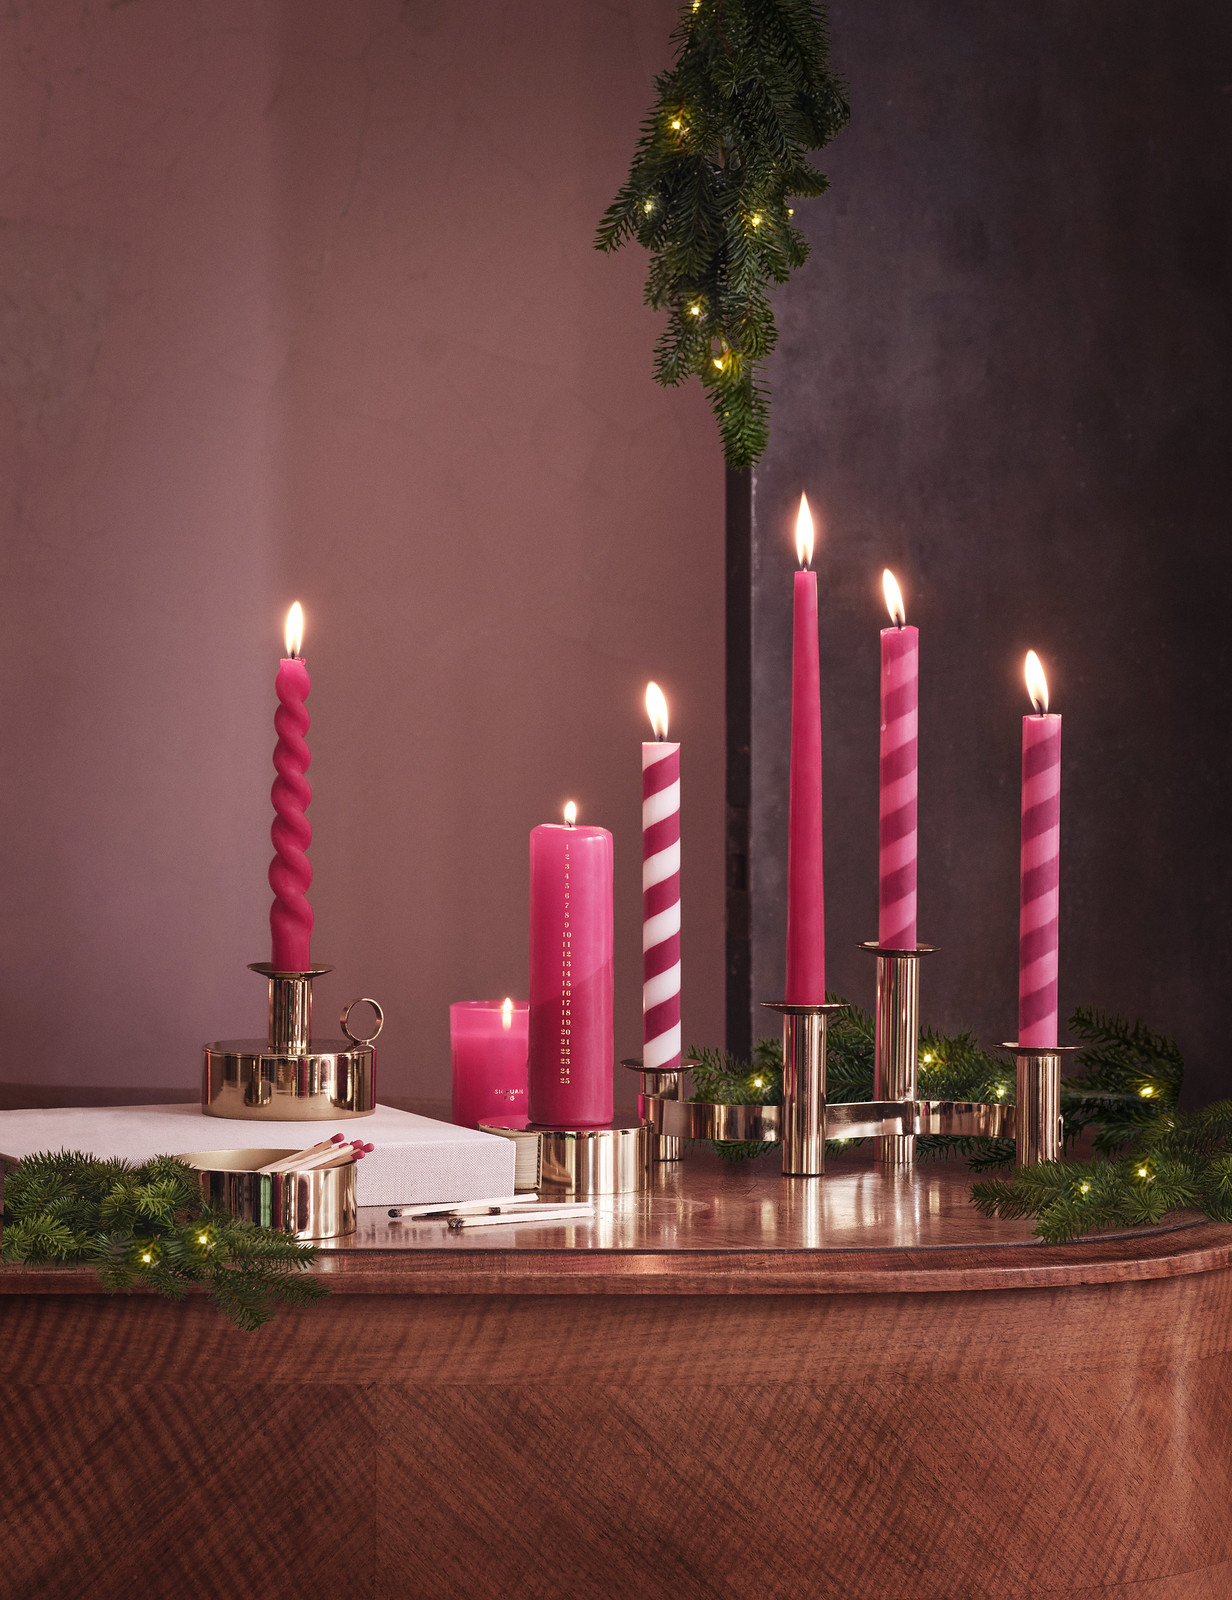 Red & Pink Striped Candles | H&M Home Christmas Collection | Affordable Holiday Decor | Christmas Tree Decorating | Inexpensive Christmas Decor | Red Christmas Decor | Living Room Christmas Decorating Ideas | Christmas Aesthetic | Christmas Decor Ideas | Vibrant Christmas Decor